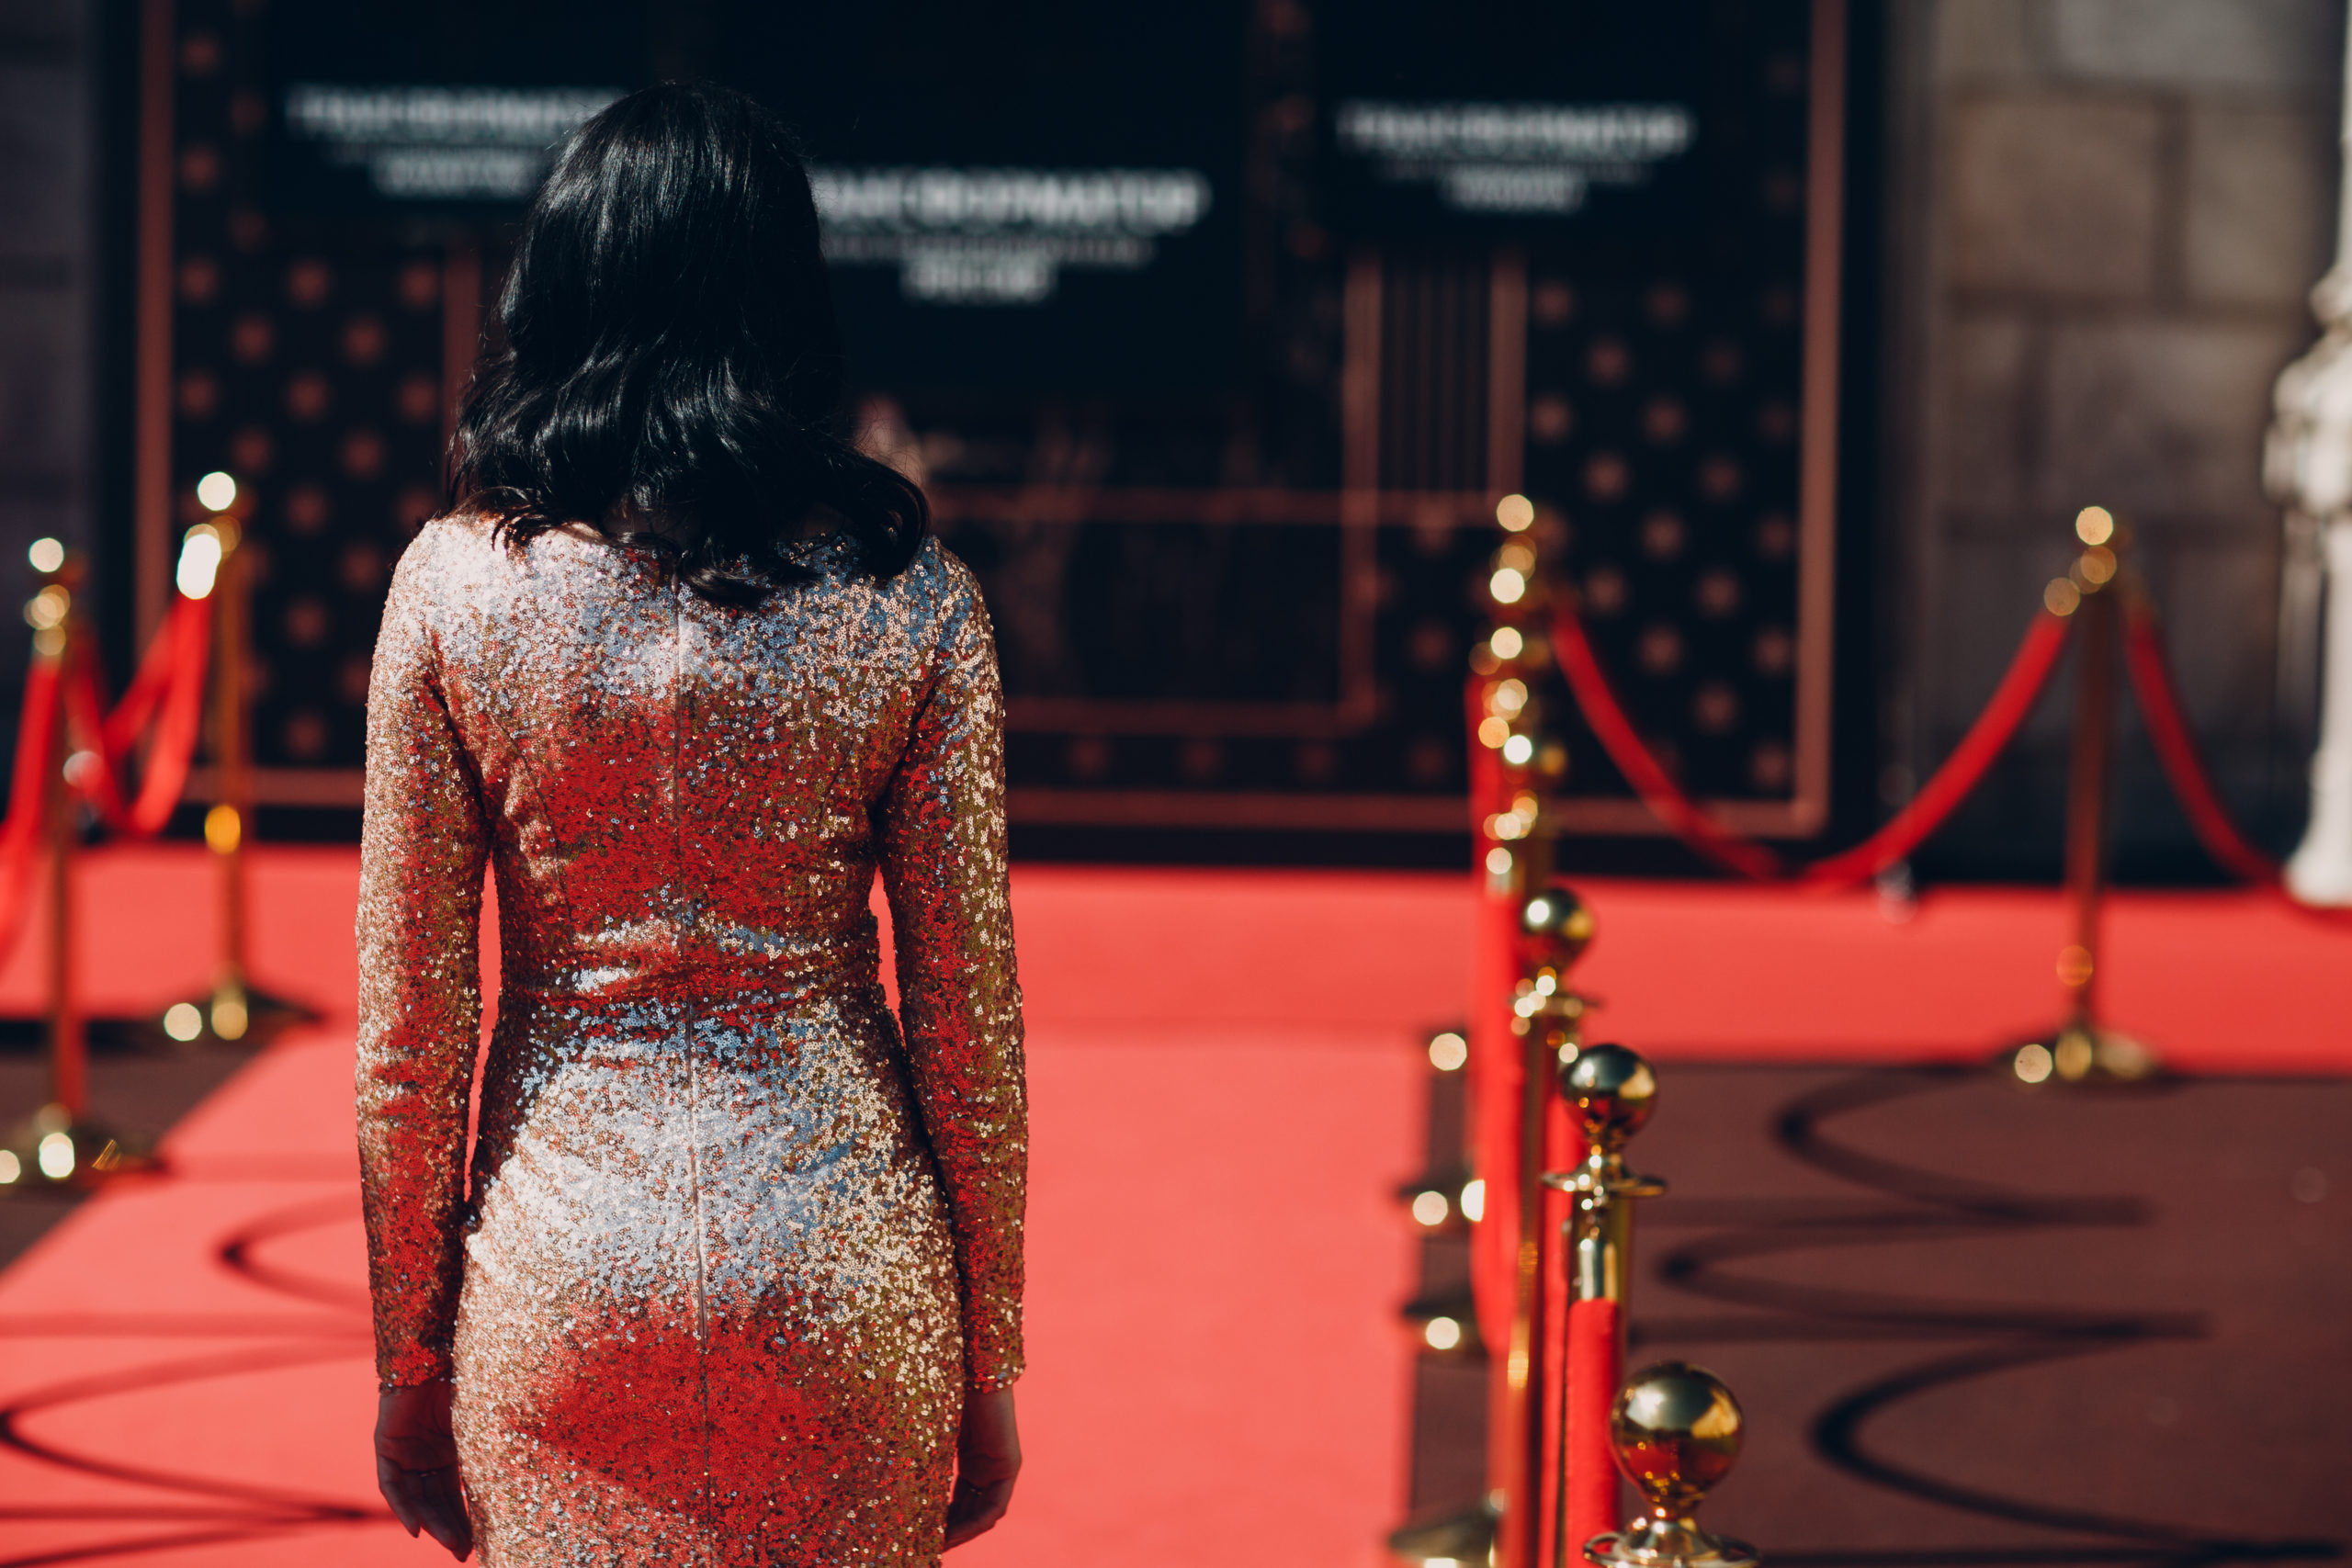 Photo Credit: Woman Luxurious Dress On Red Carpet